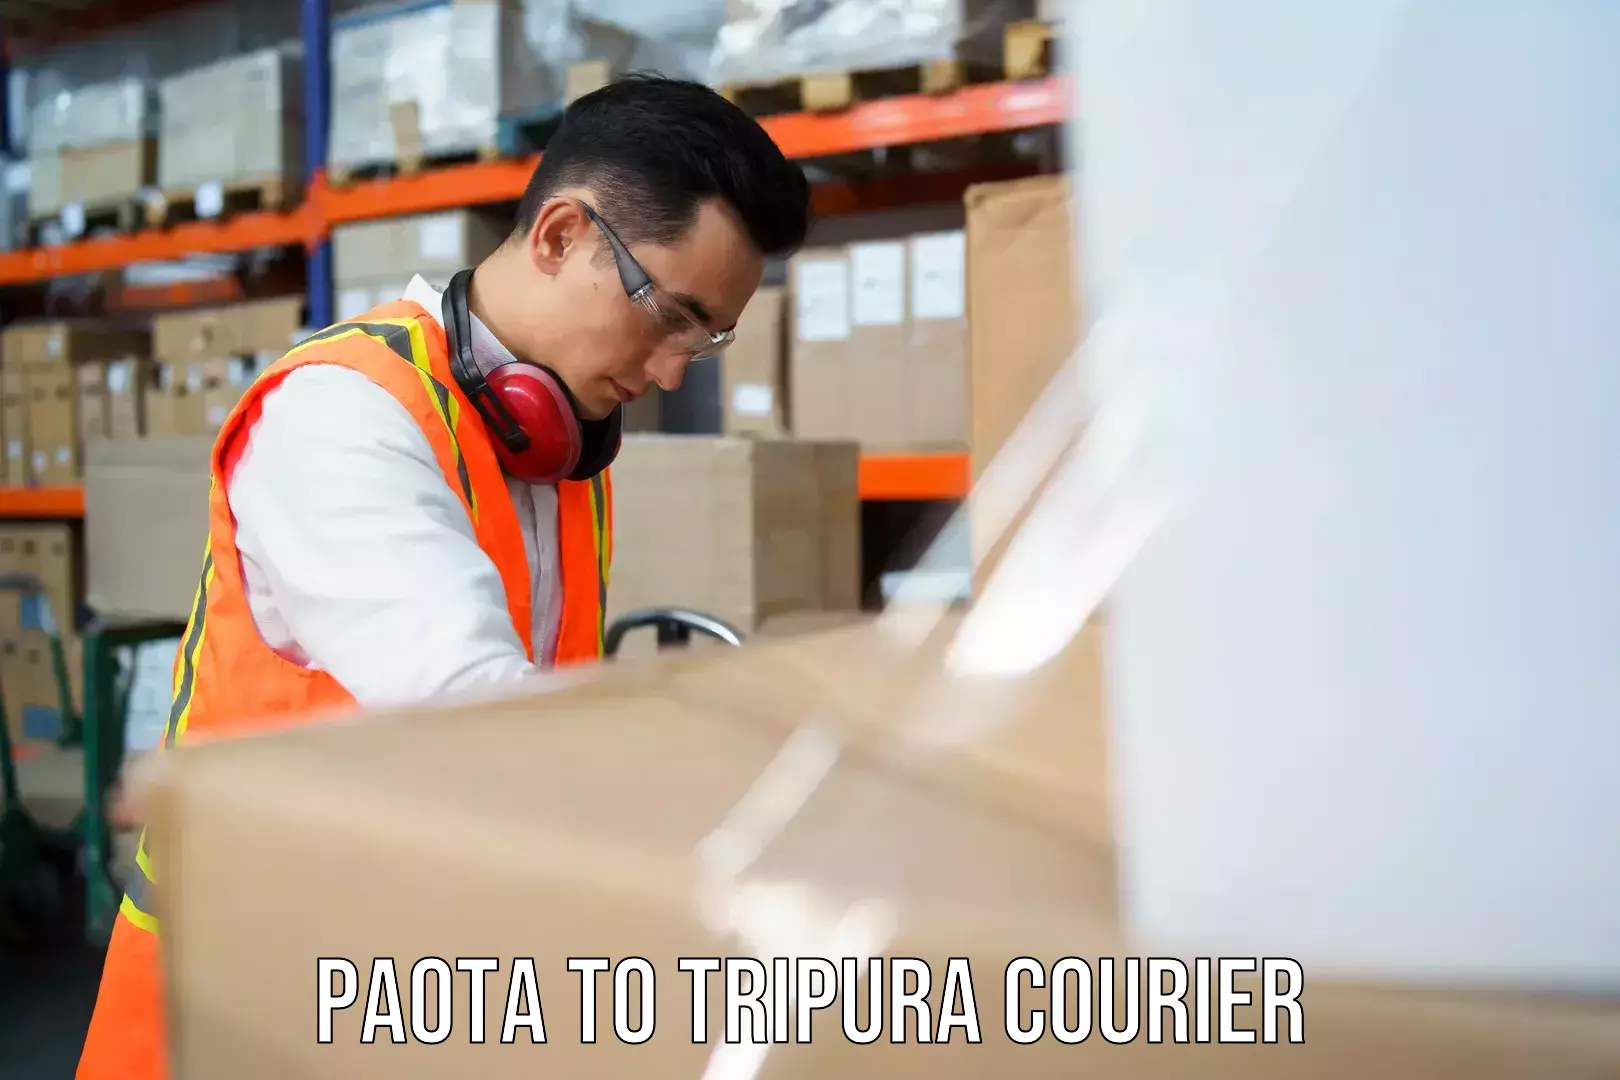 State-of-the-art courier technology Paota to Tripura